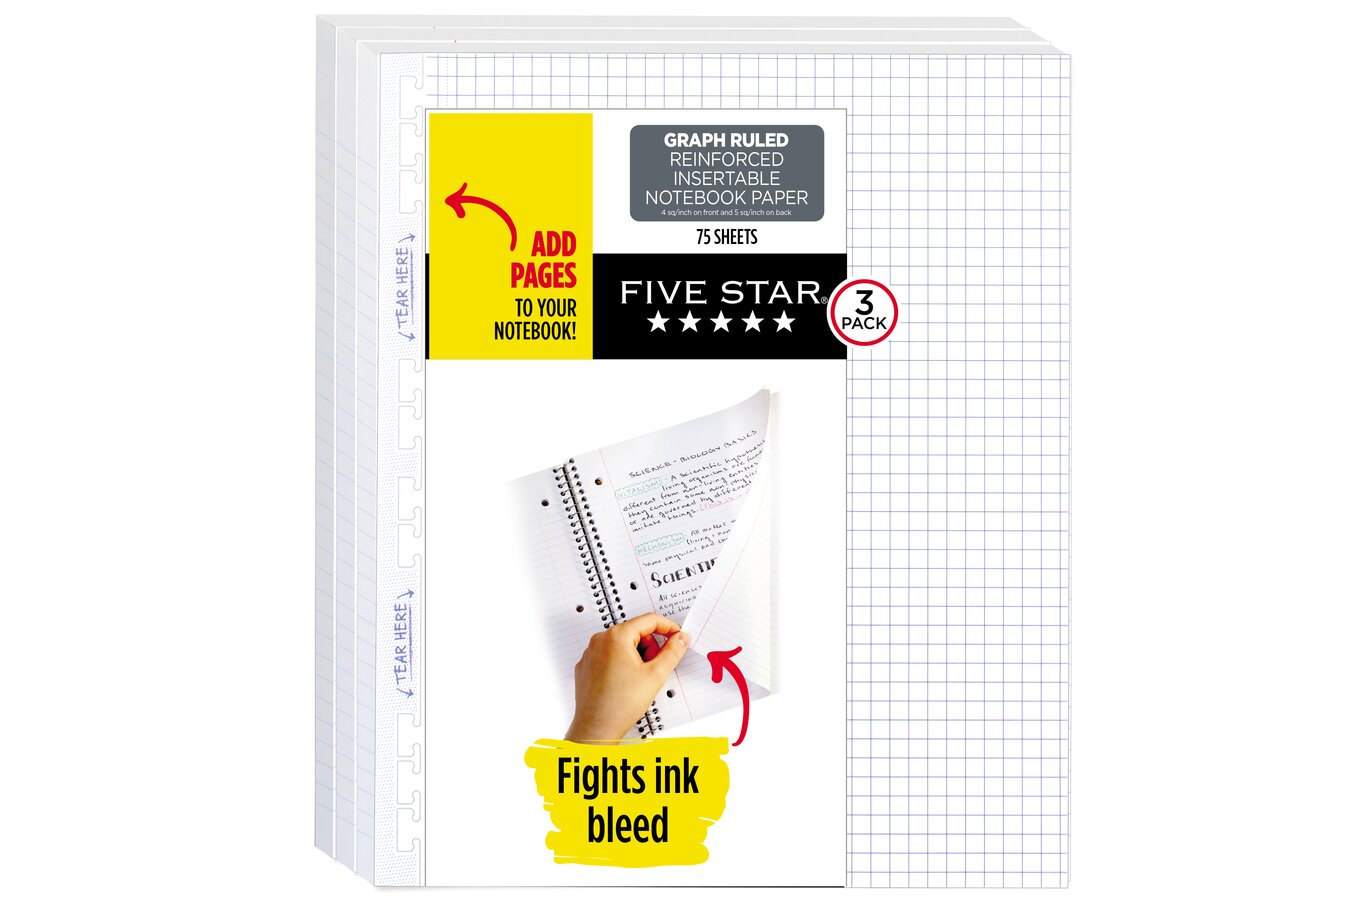  Five Stars Review Excellent Fill-in Rectangle Rubber